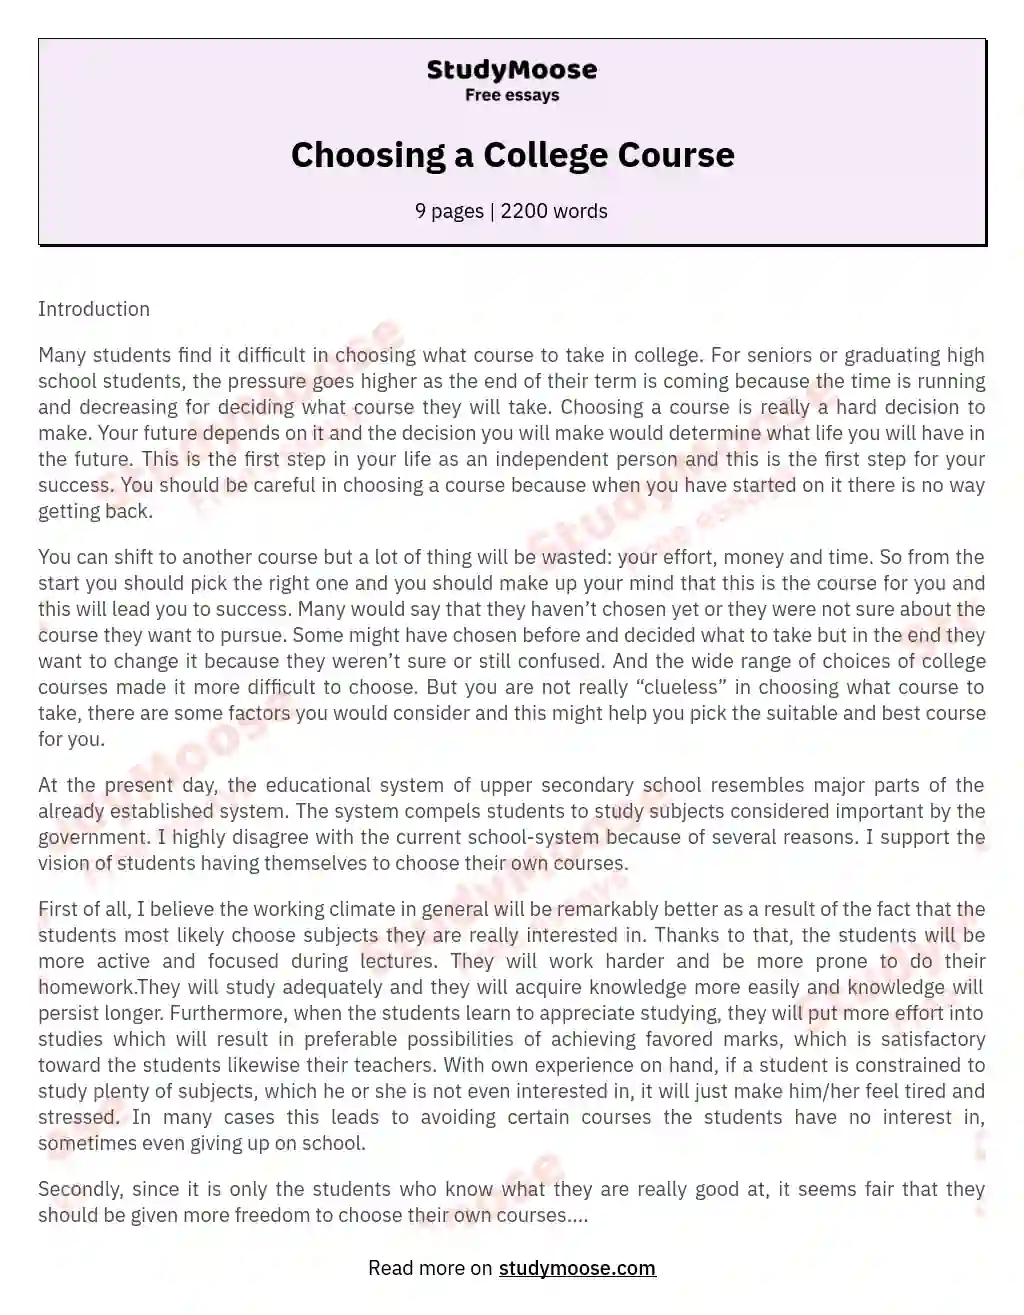 Choosing a College Course essay